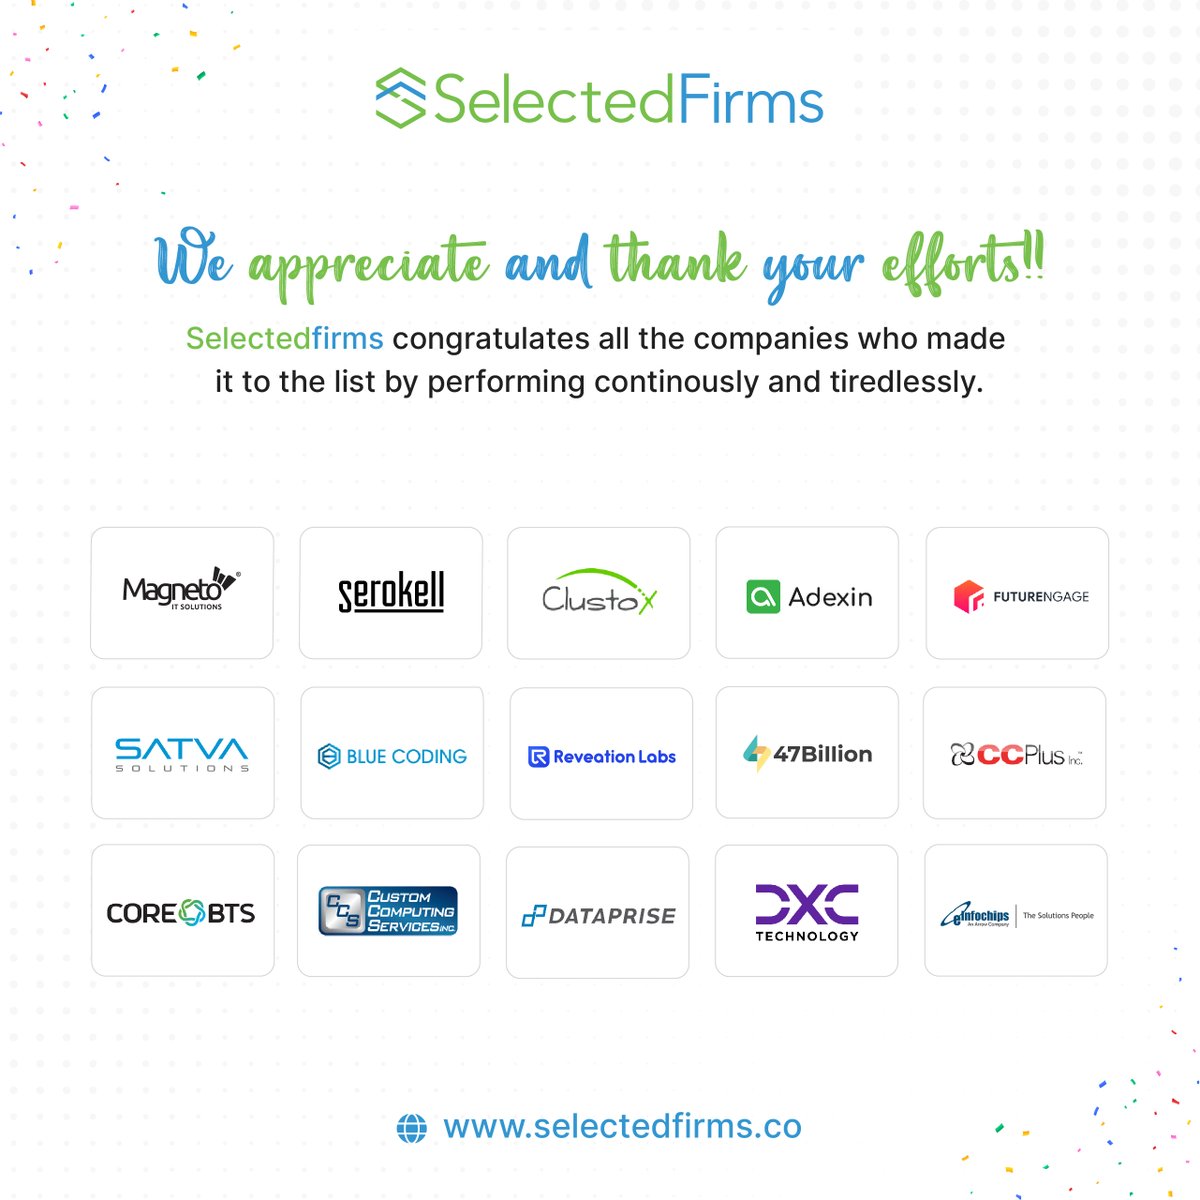 SelectedFirms sends a shout-out to all the top companies in the field of IT services companies in the USA: j1l.in/ZpSkTZ

Congratulations!
@magnetoit @serokell @clustox @adexincom 
@futurengage @satvasolutions @BlueCodingLLC 
@ReveationLabs @47Billion @ccplustuition